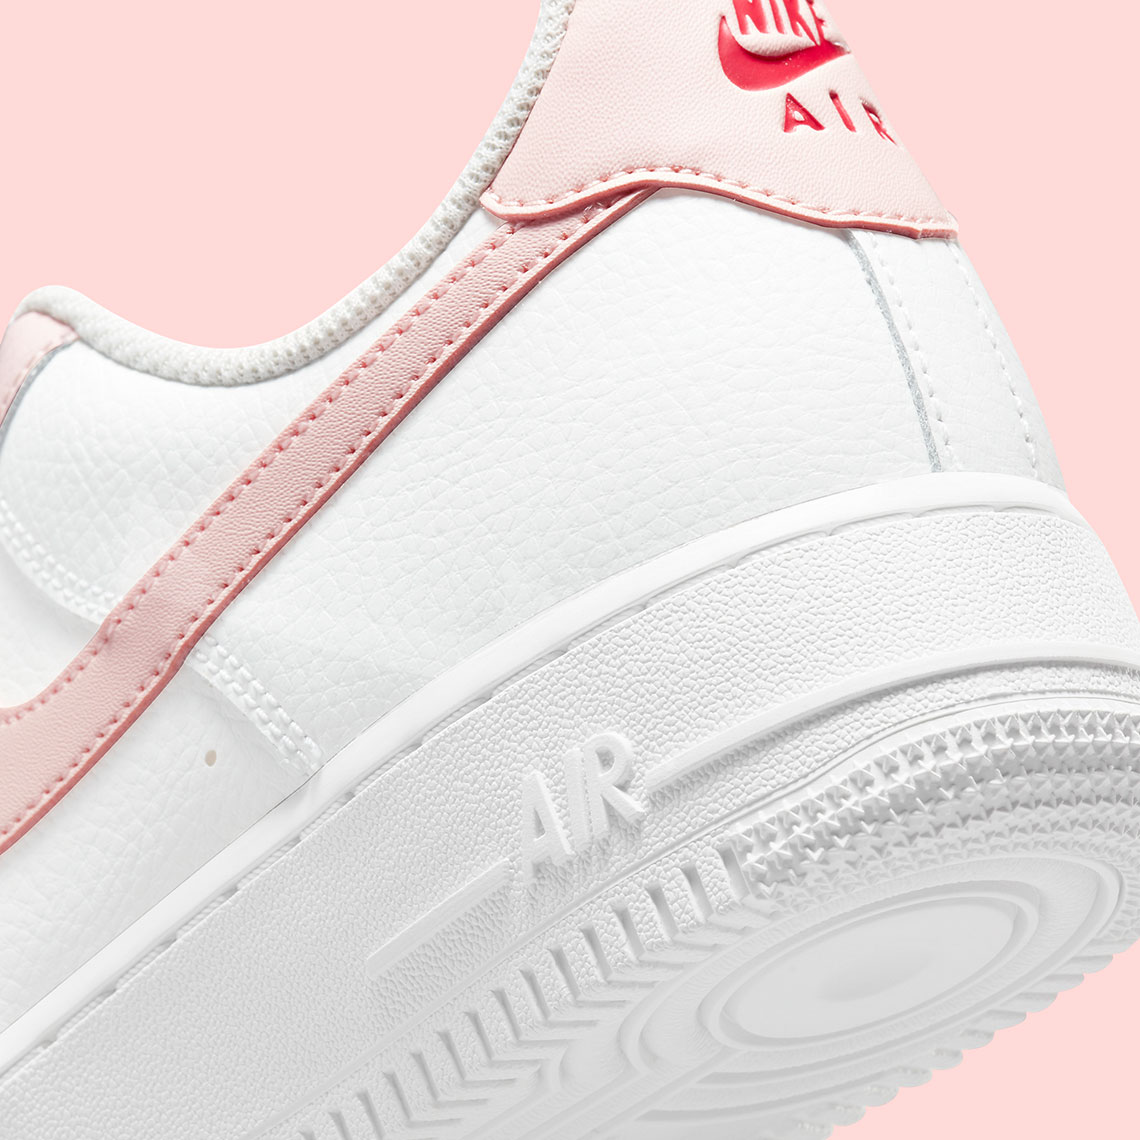 Nike Air Force 1 WMNS Pale Coral 315115-167 | SneakerNews.com